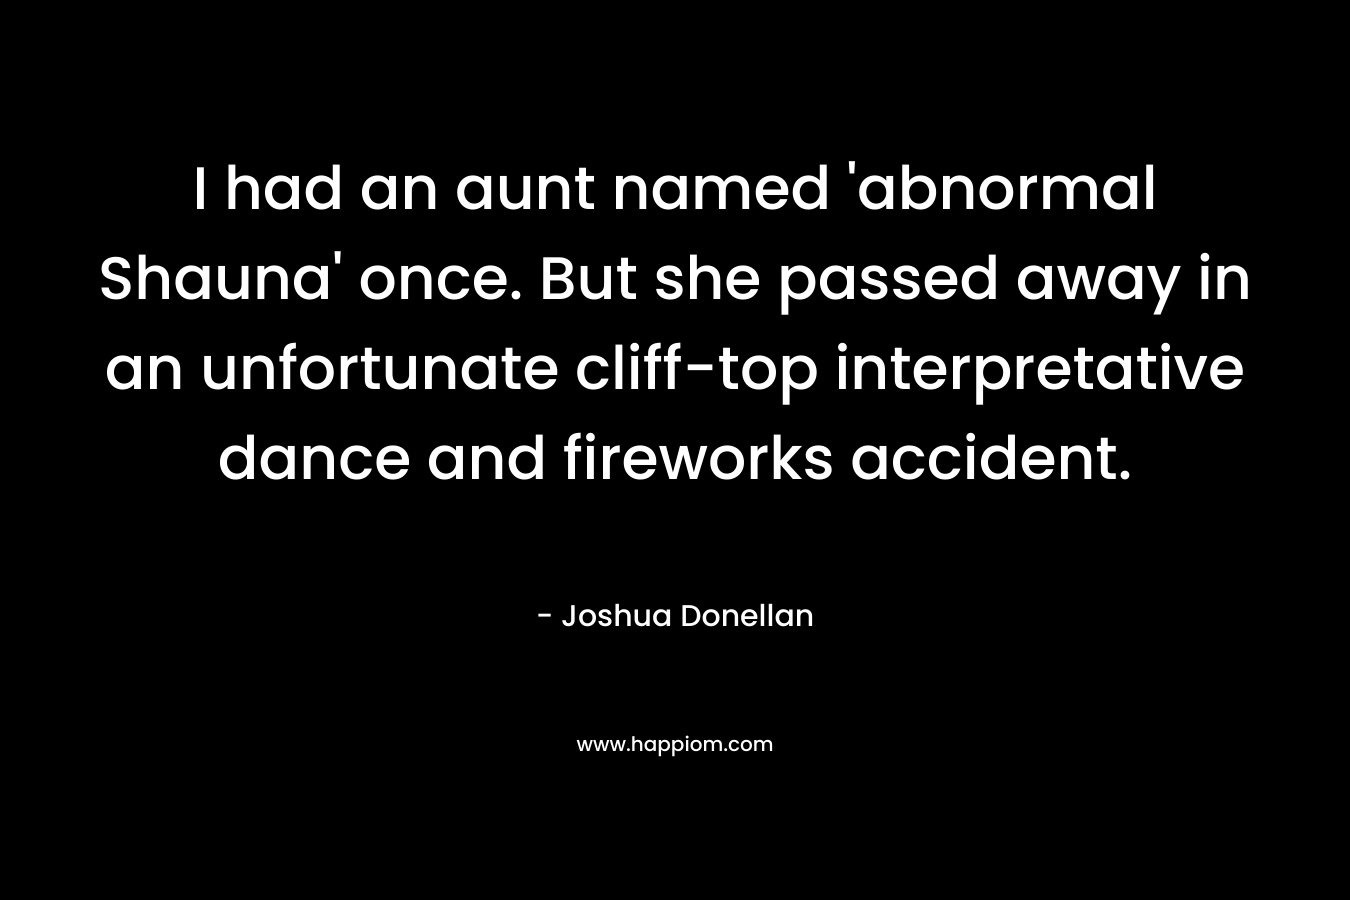 I had an aunt named 'abnormal Shauna' once. But she passed away in an unfortunate cliff-top interpretative dance and fireworks accident.